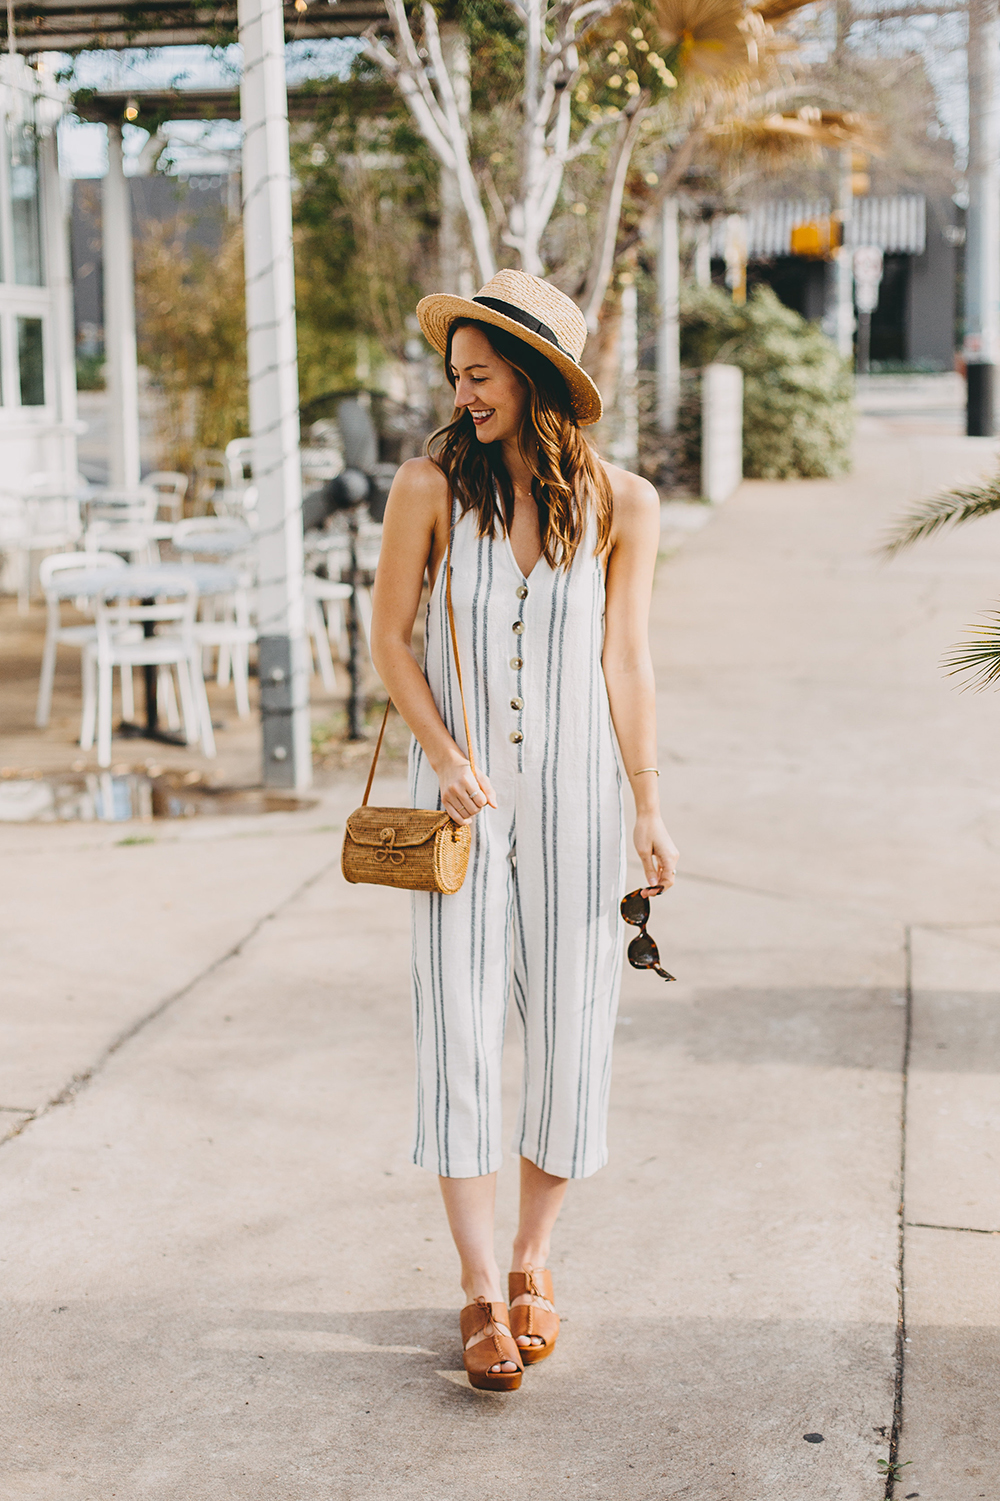 livvyland-blog-olivia-watson-austin-texas-fashion-lifestyle-style-blogger-urban-outfitters-striped-jumpsuit-outfit-rattan-handbag-10